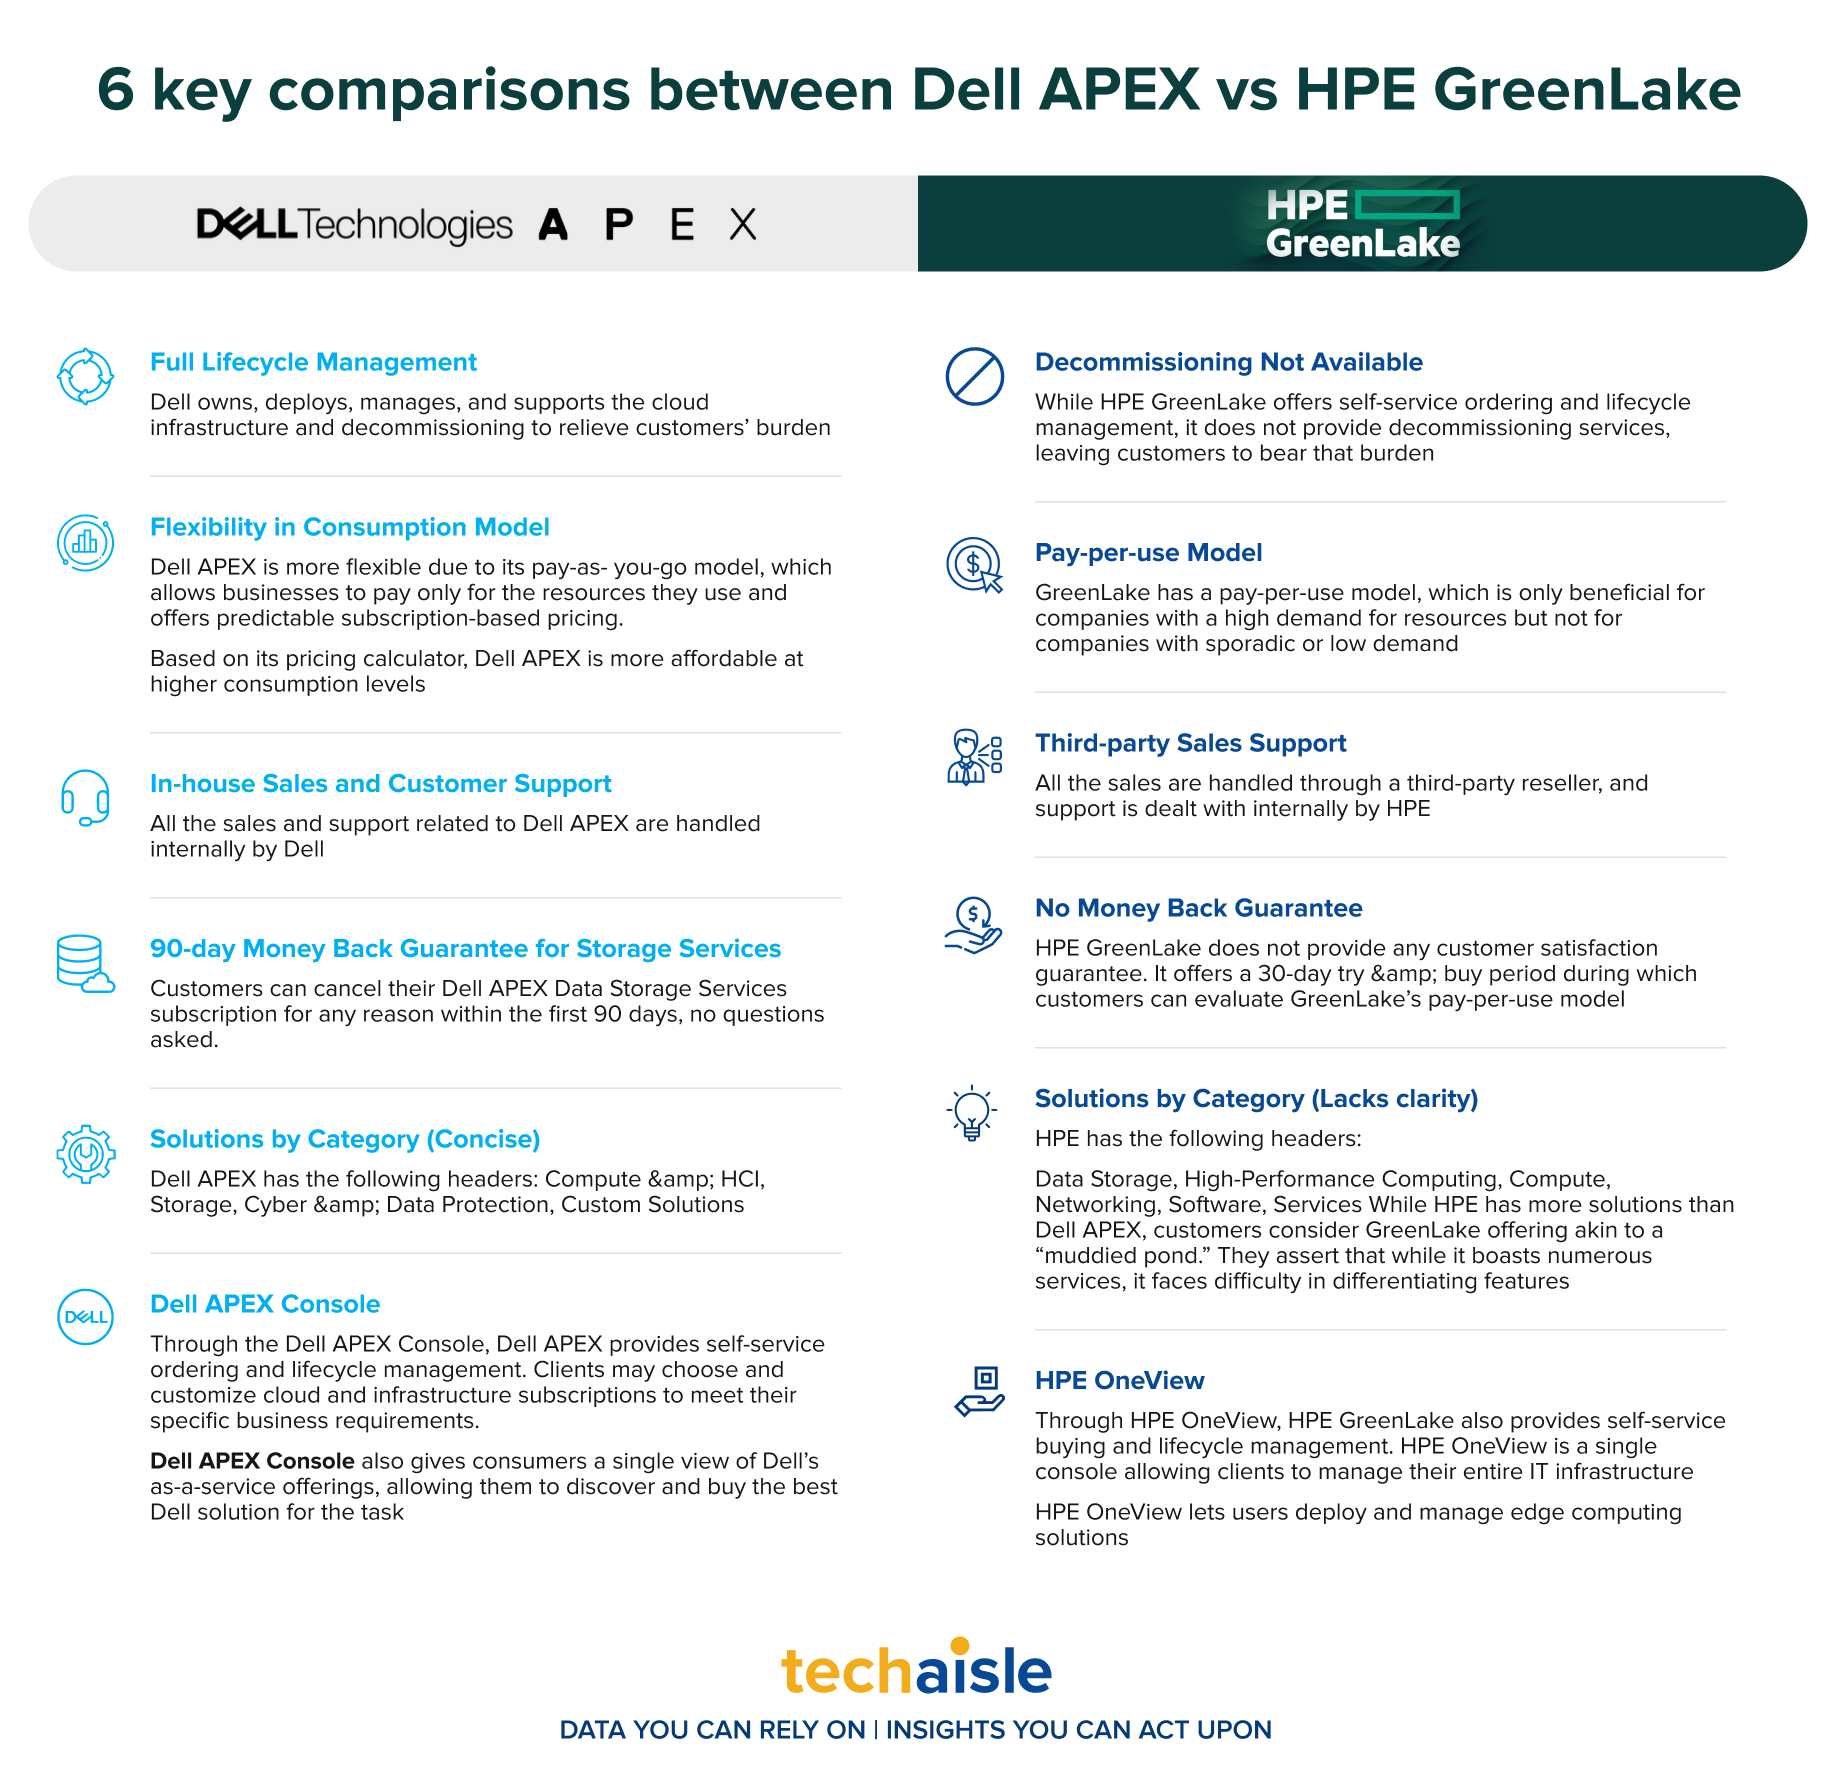 Combination of Dell APEX and Multi-cloud by Design is a winning combination  - Techaisle Blog